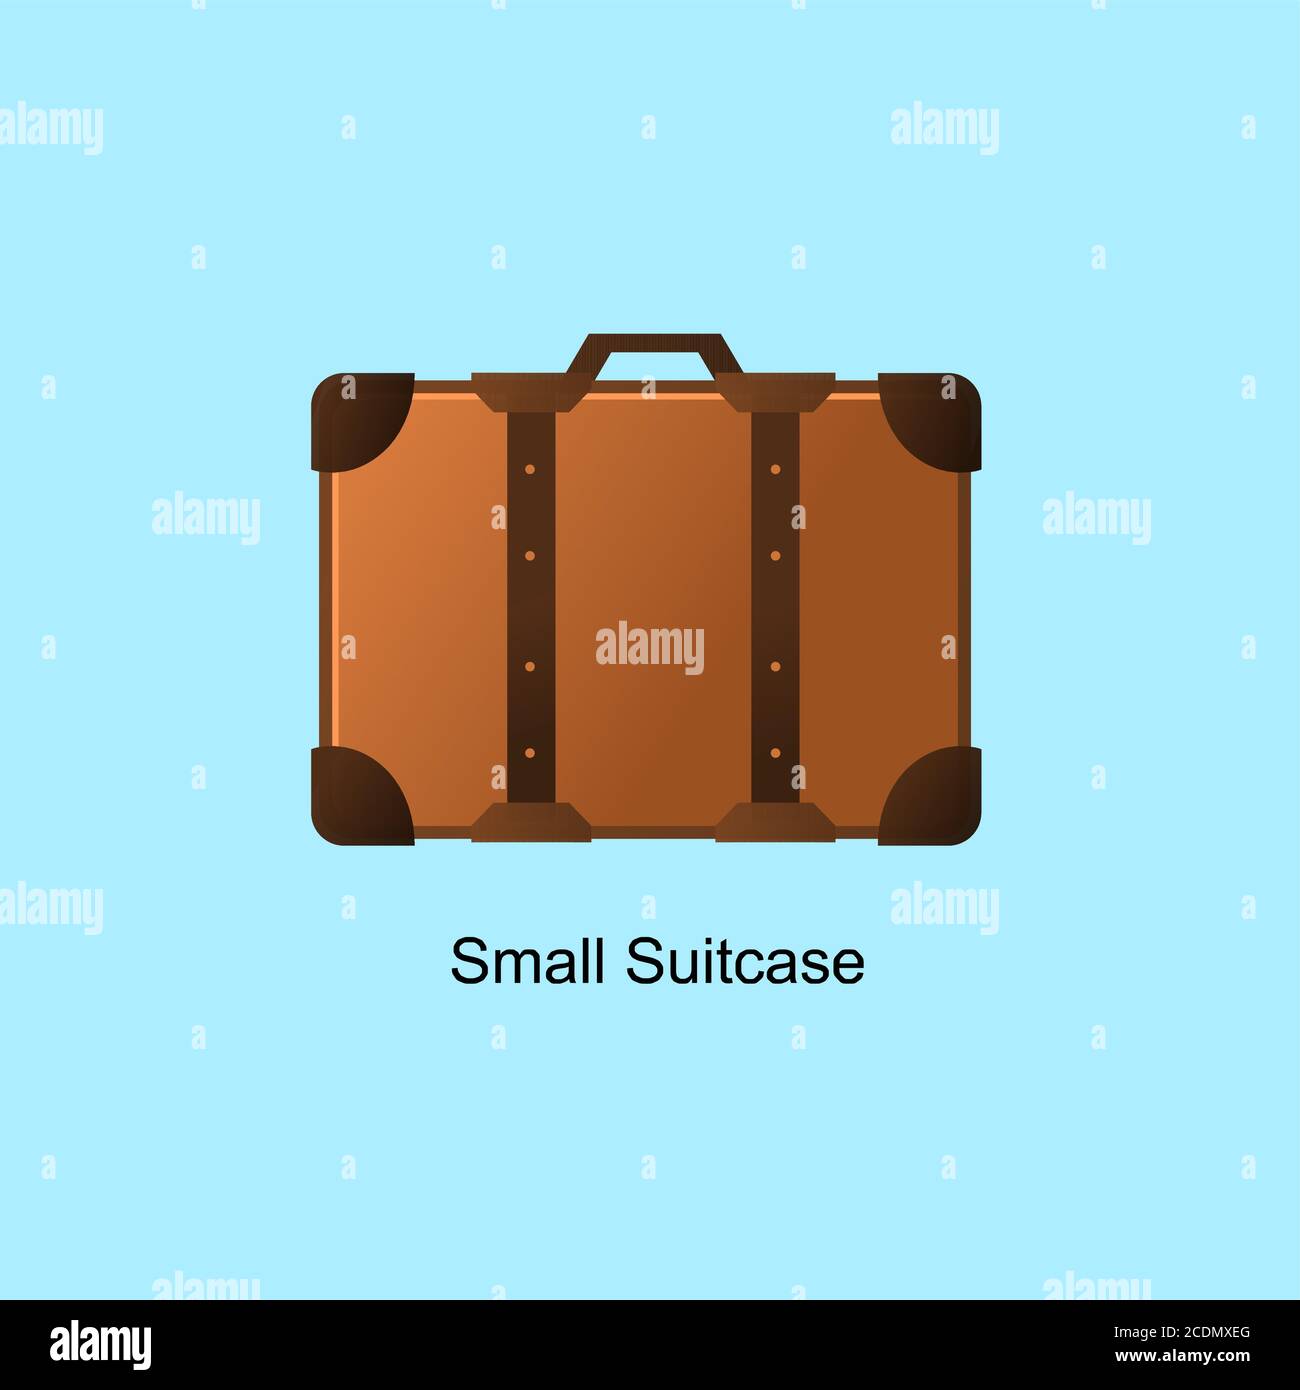 small suitcase with brown color vector design, additional image include layer by layer Stock Vector